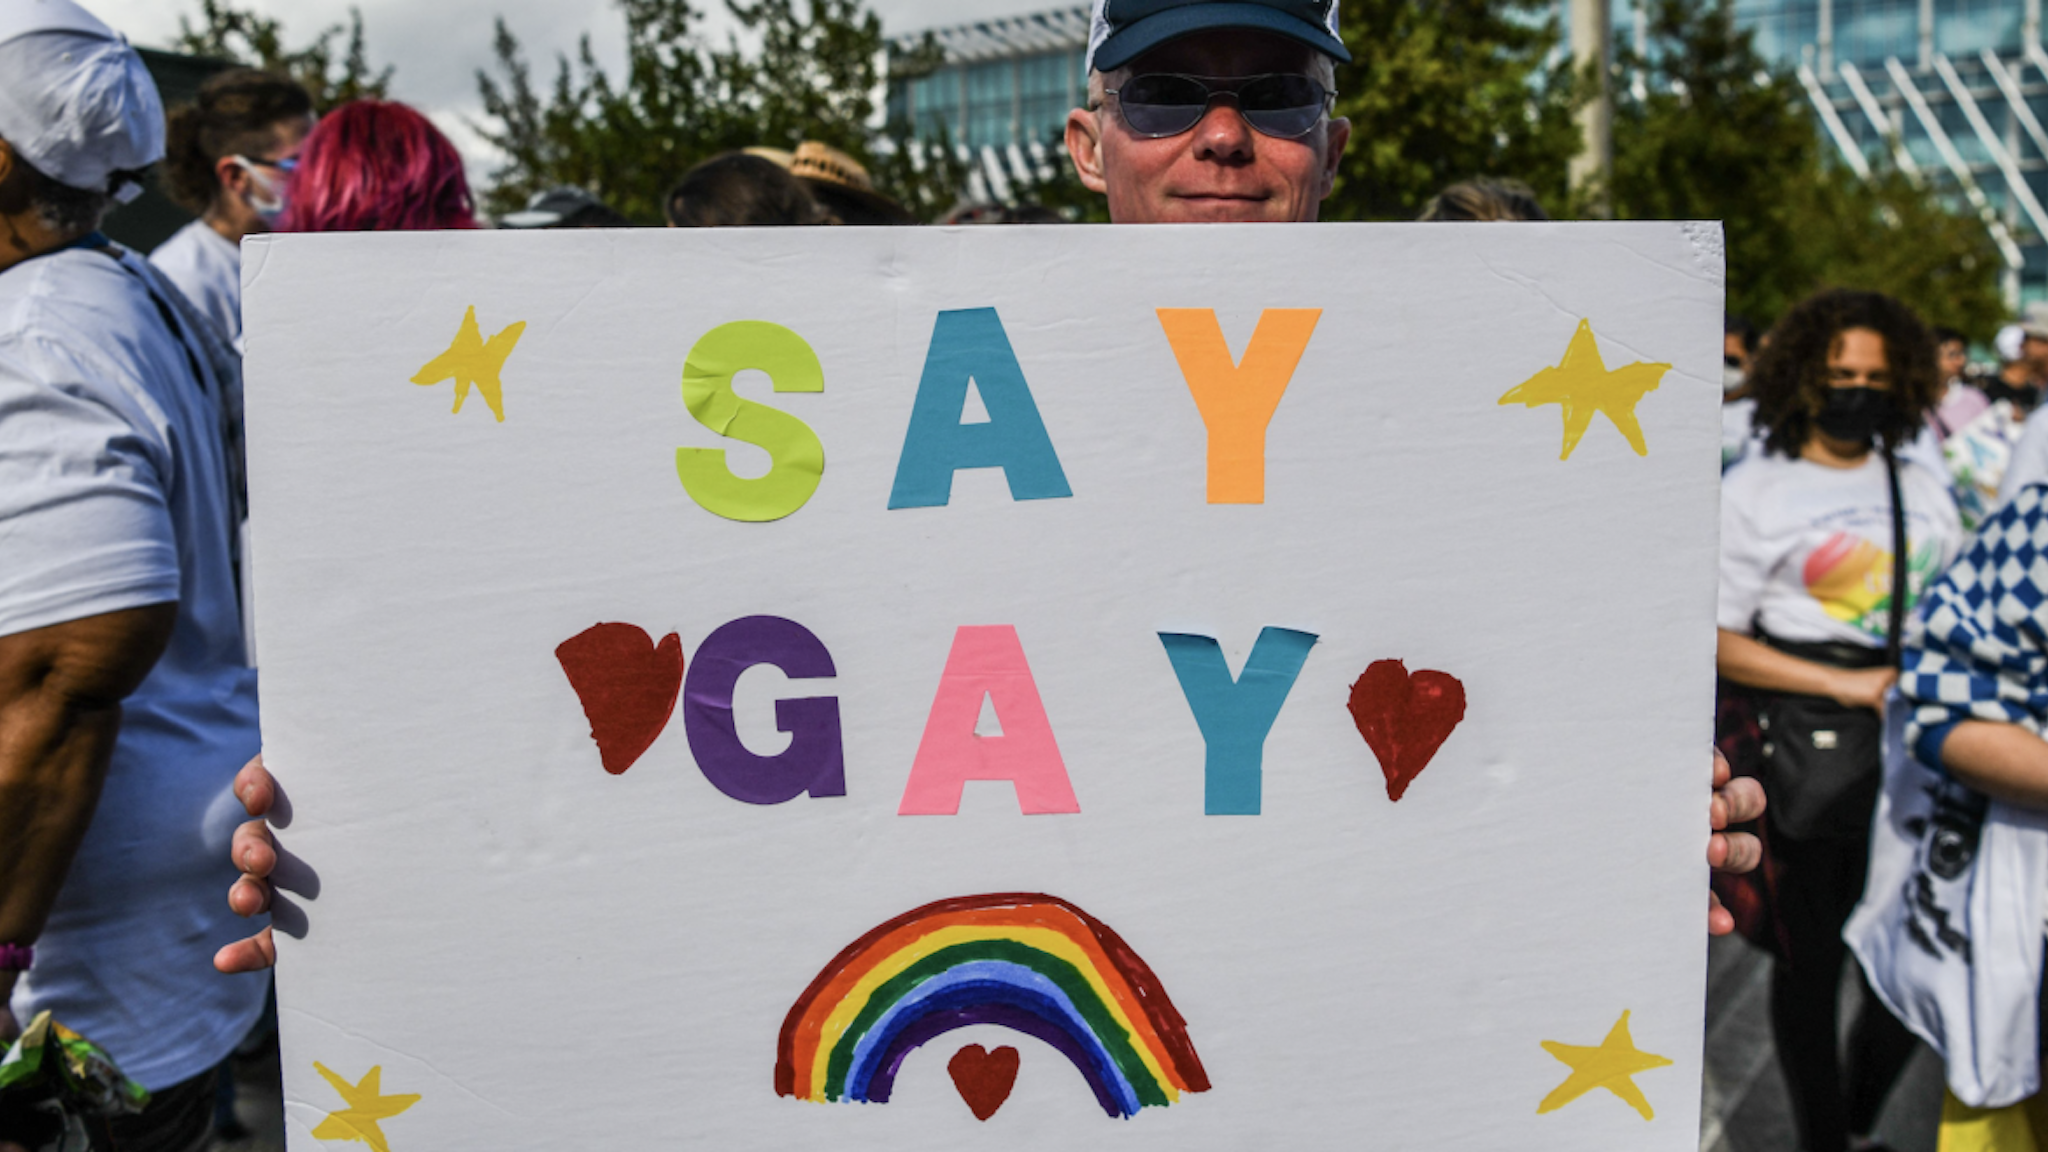 Members and supporters of the LGBTQ community attend the "Say Gay Anyway" rally in Miami Beach, Florida on March 13, 2022. - Florida's state senate on March 8 passed a controversial bill banning lessons on sexual orientation and gender identity in elementary schools, a step that critics complain will hurt the LGBTQ community. (Photo by CHANDAN KHANNA/AFP via Getty Images)